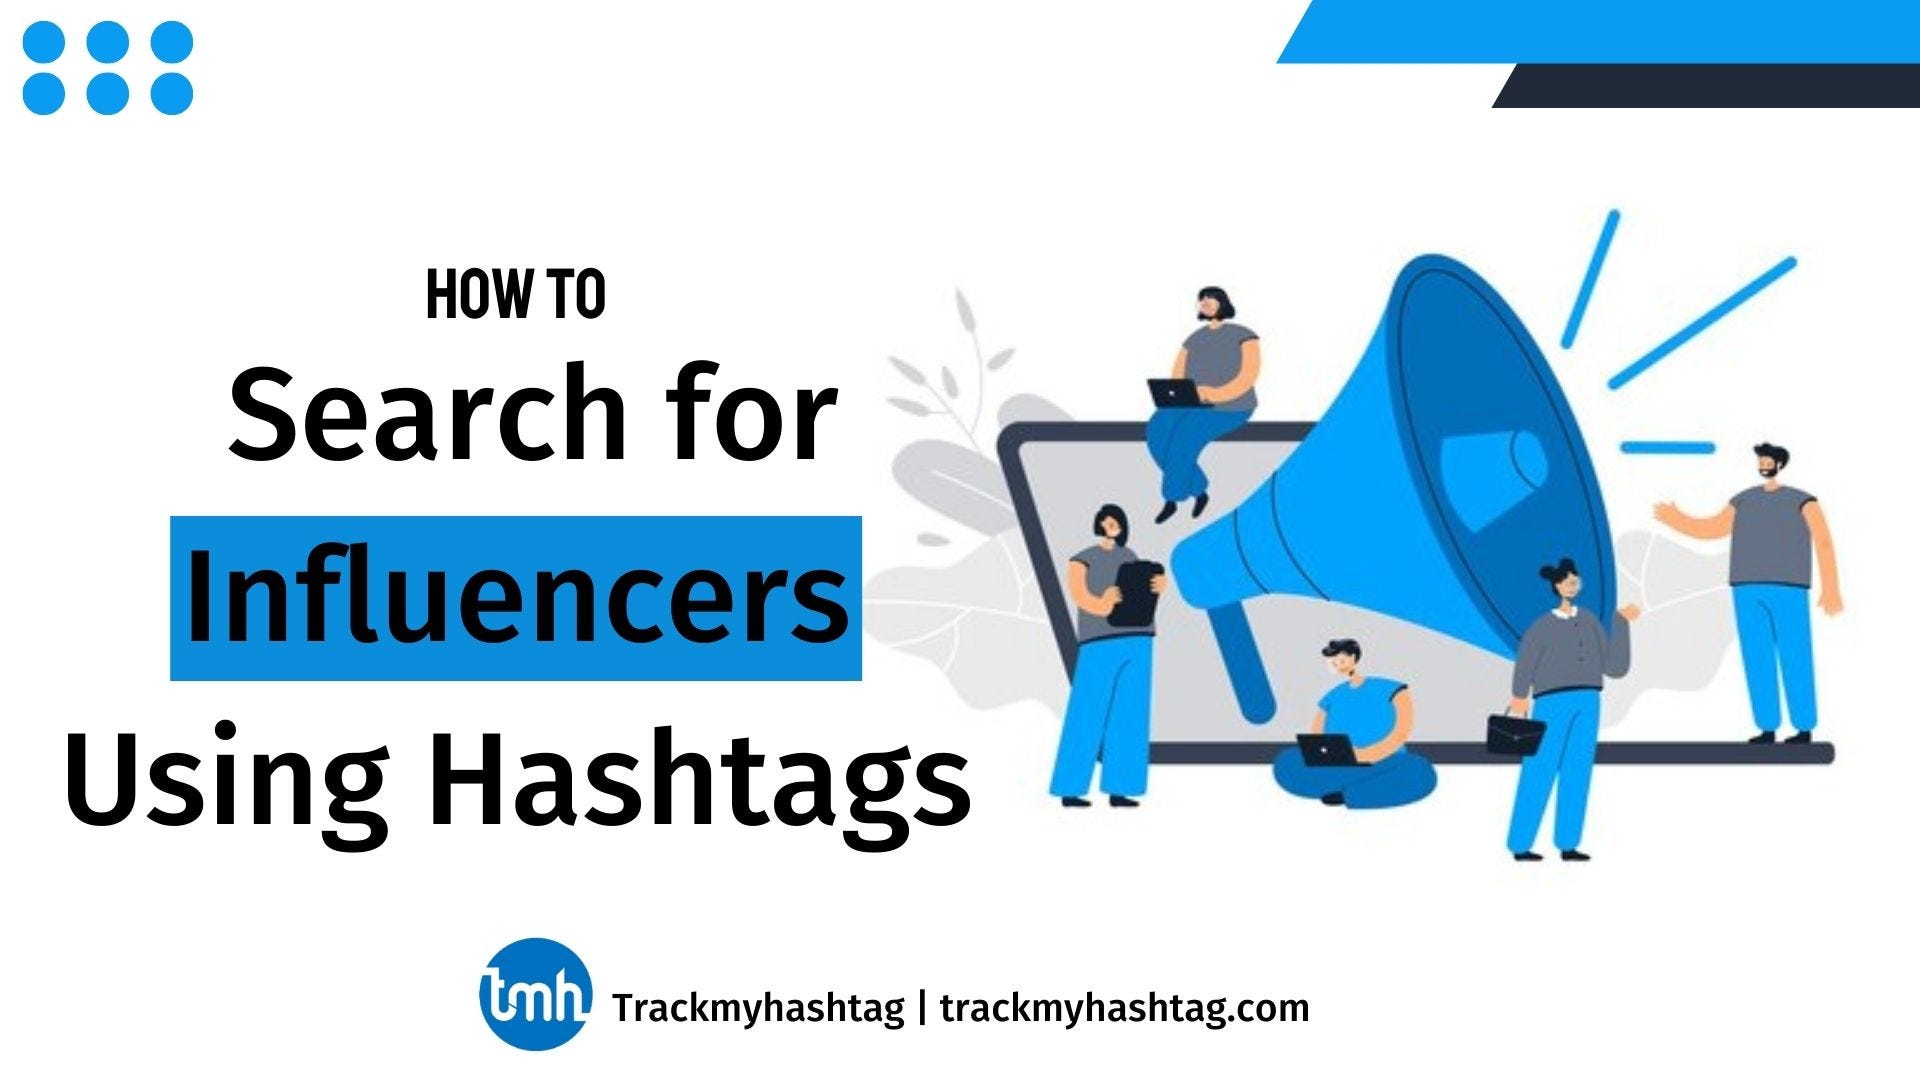 How to Search for Influencers Using Hashtags?